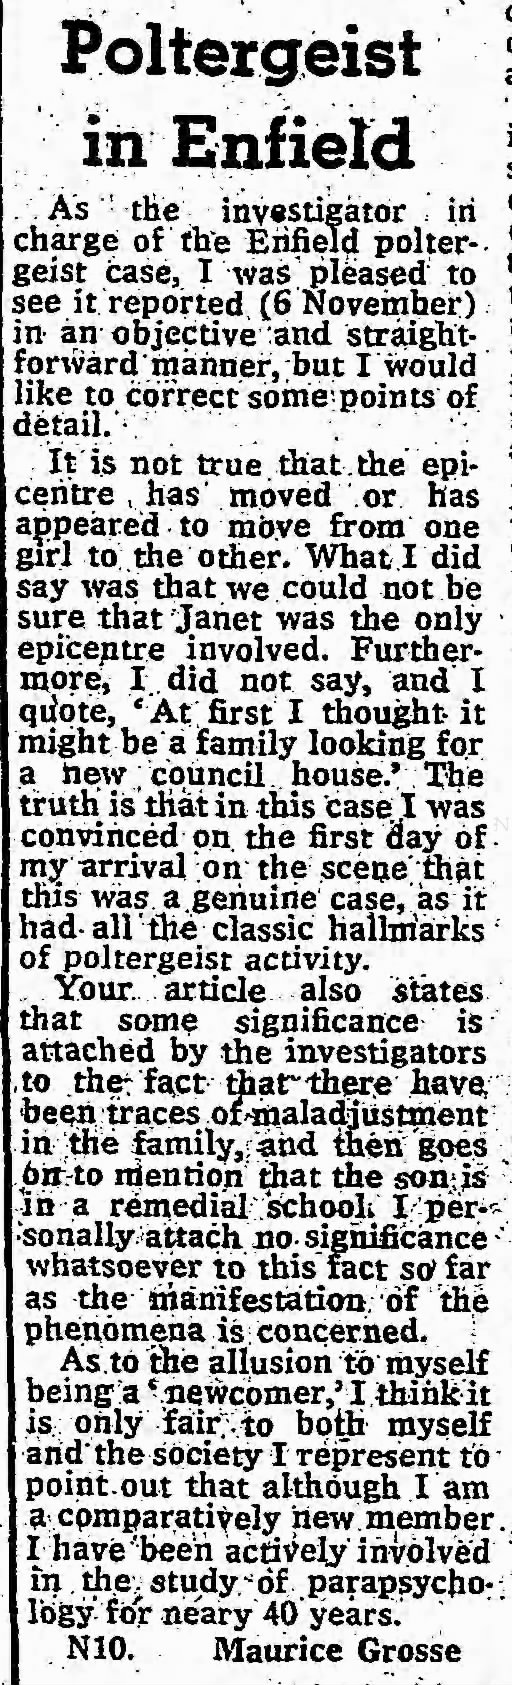 Enfield Poltergeist - Janet mentioned as "epicenter" of poltergeist activities